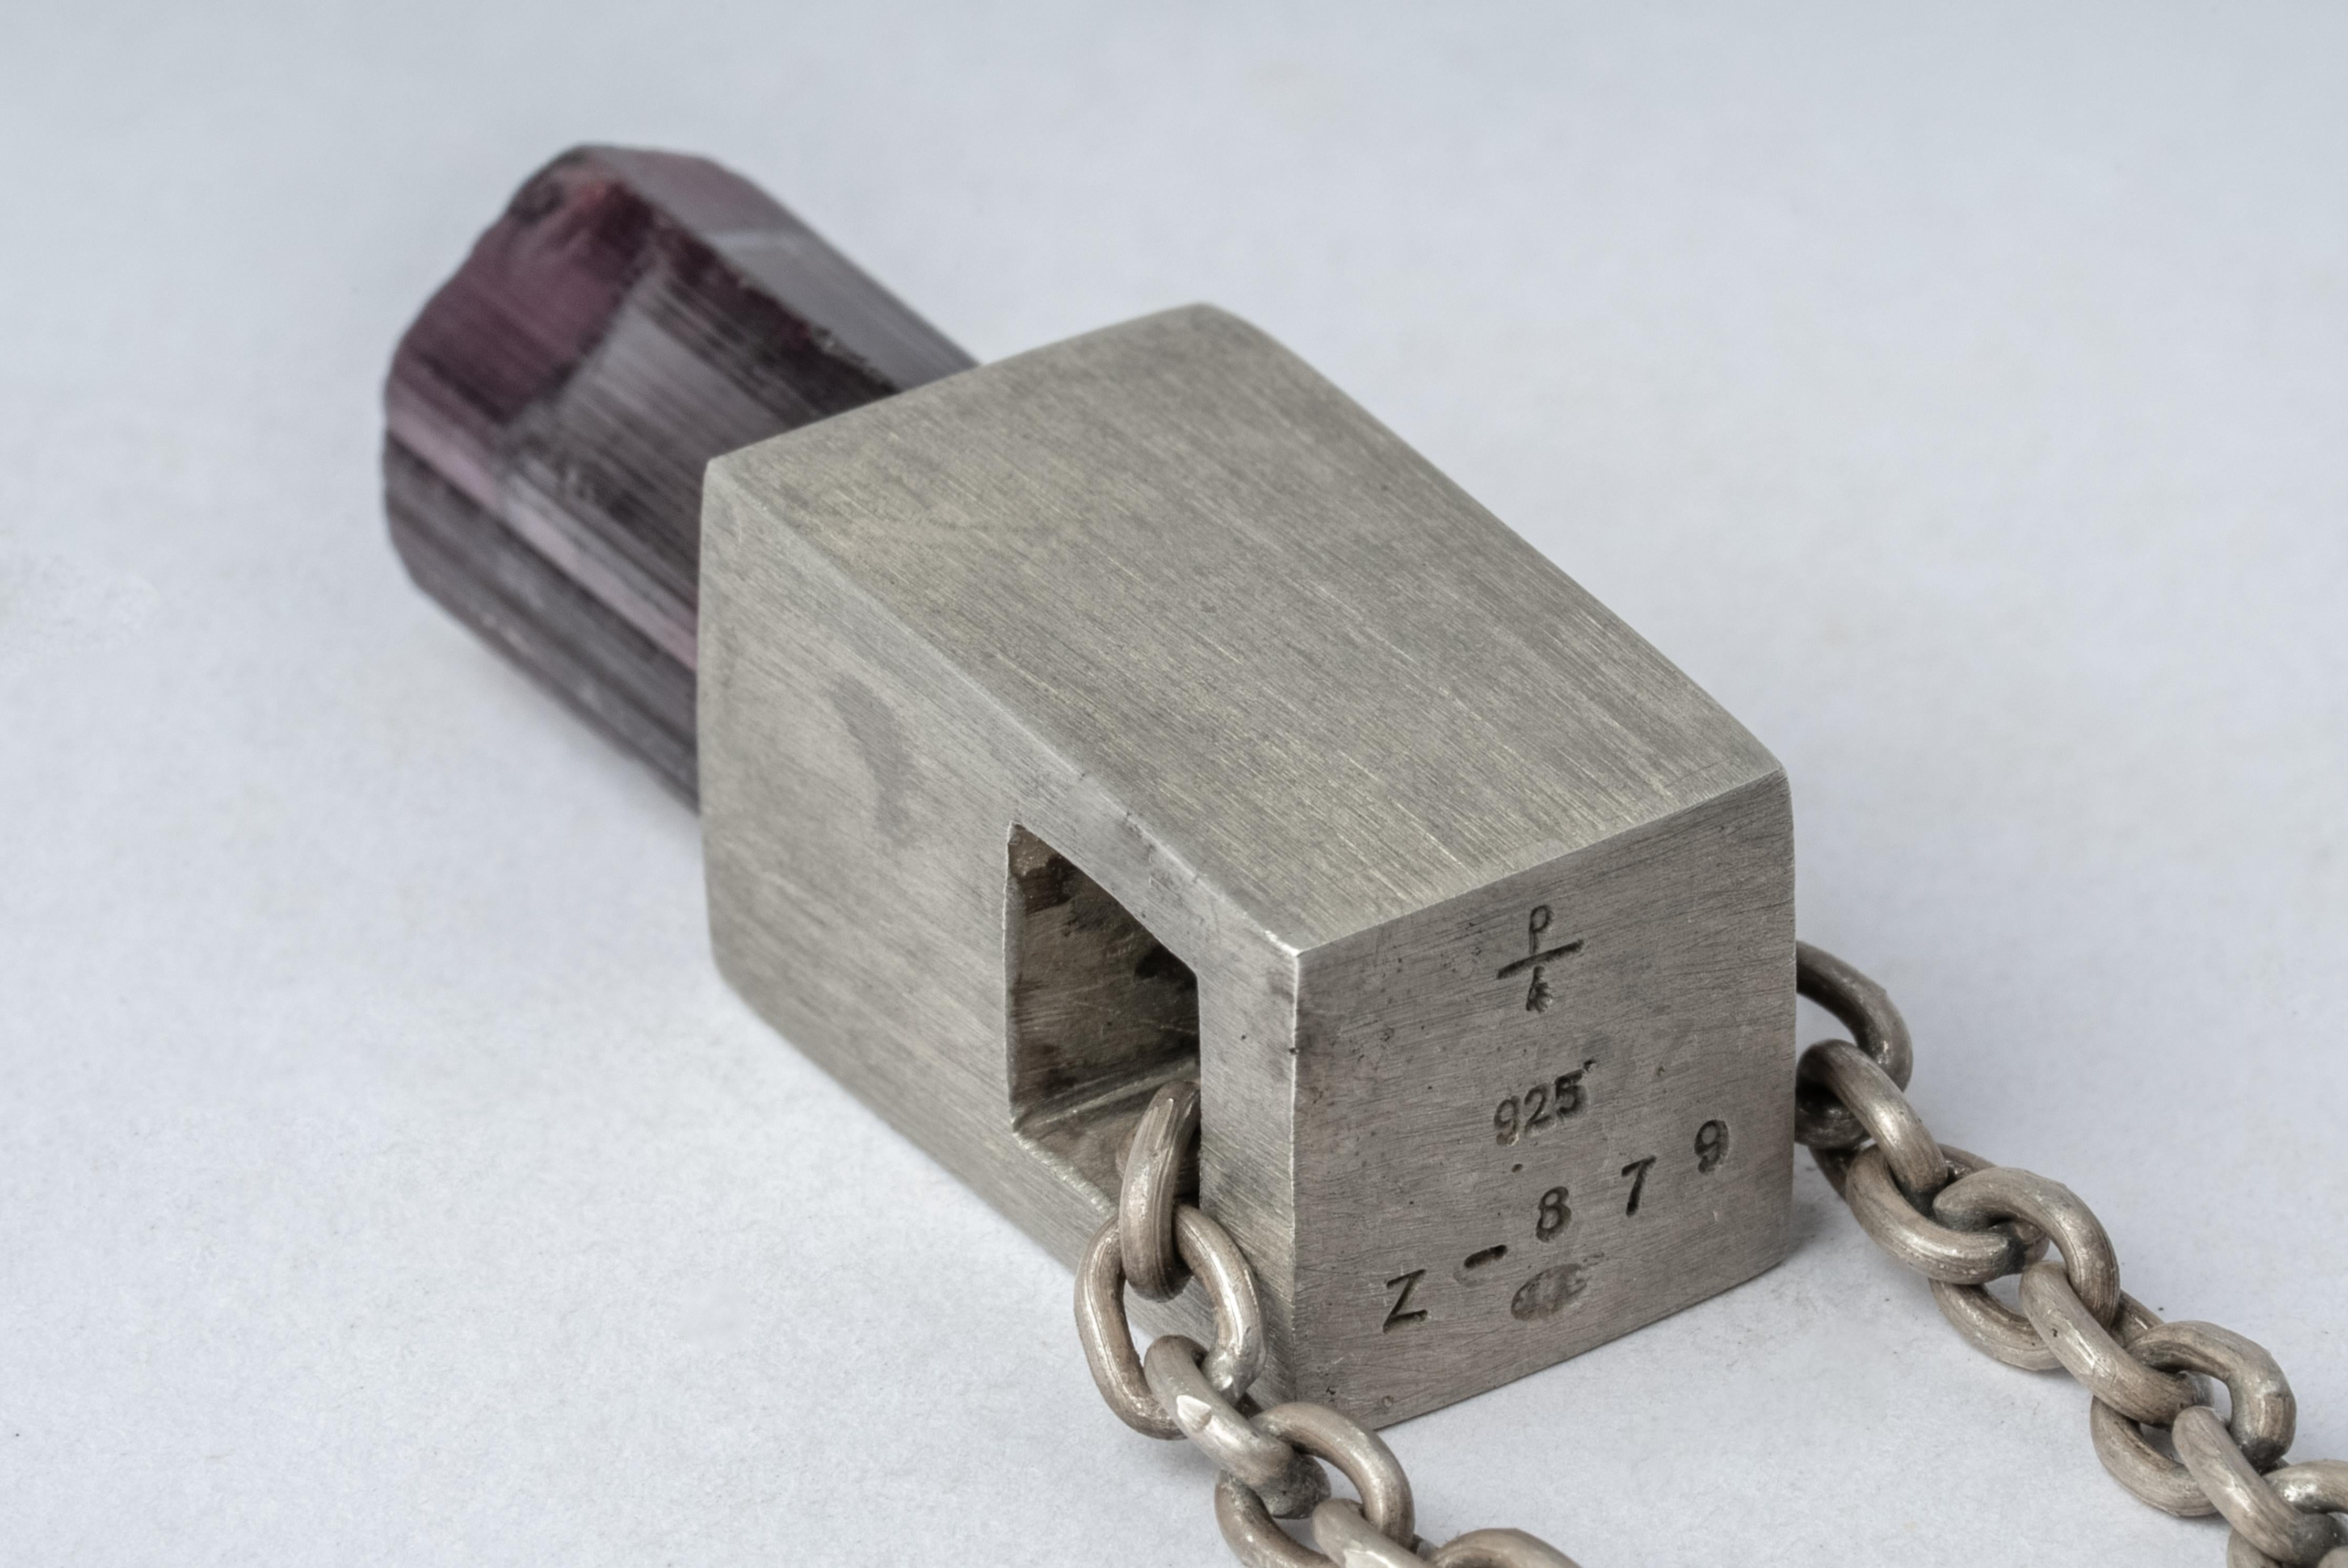 Necklace in the shape of cuboid in acid treated sterling silver and rubellite. The Talisman series is an exploration into the power of natural crystals. The title Specimen signifies a particular class of mineral that is both rare and collectable.